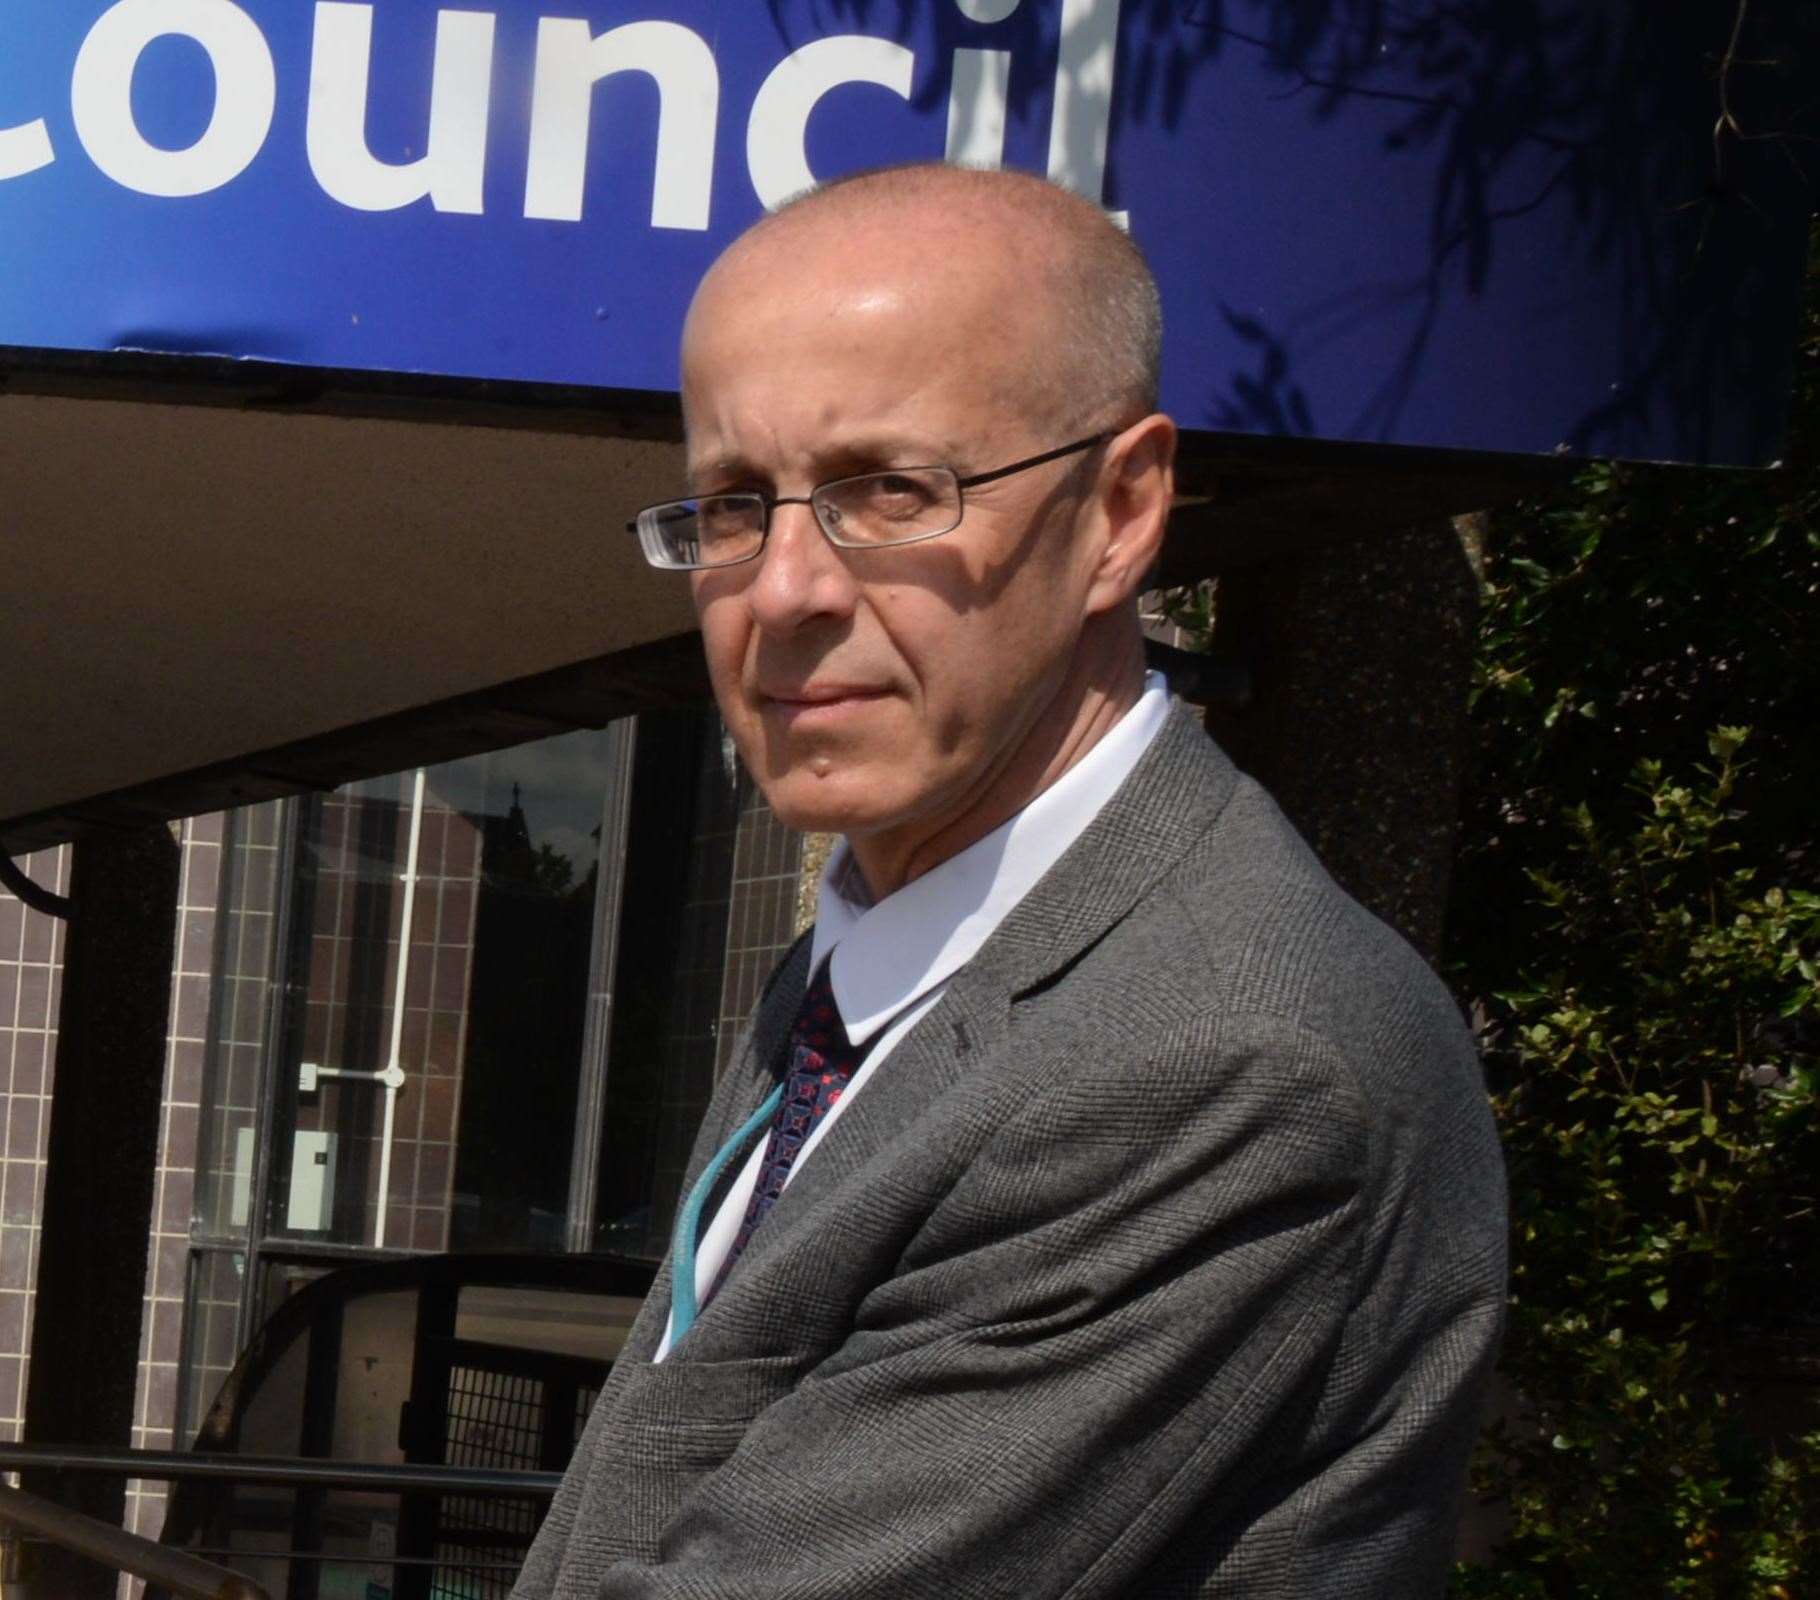 Dave Harris, head of planning at Medway Council